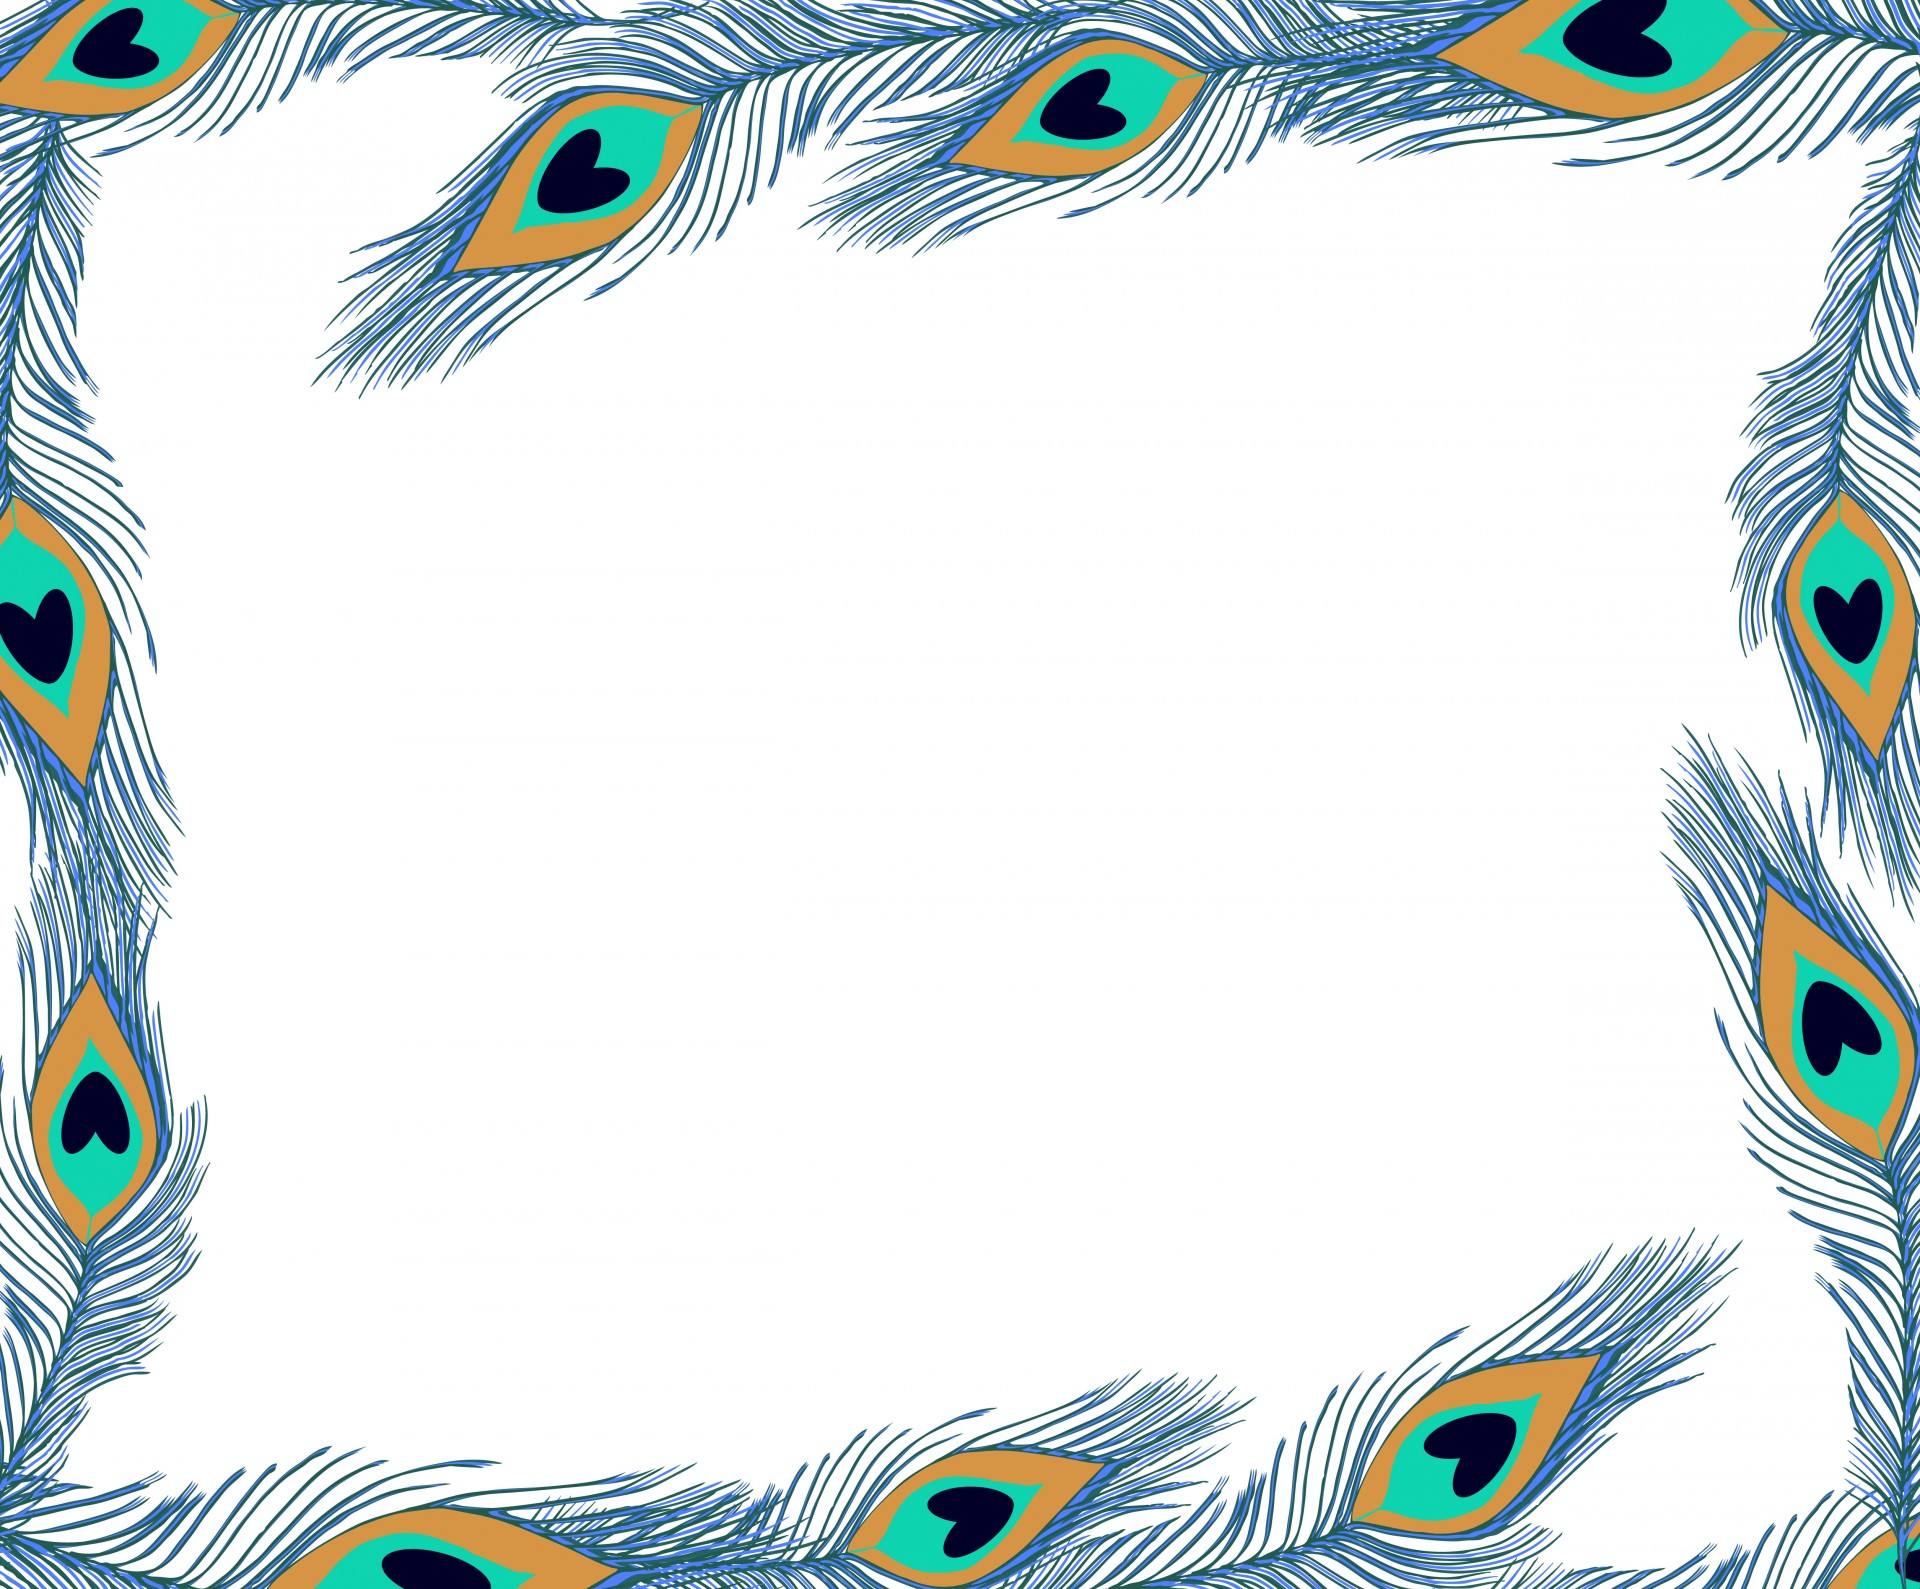 Peacock Feather Border Feathers Frame